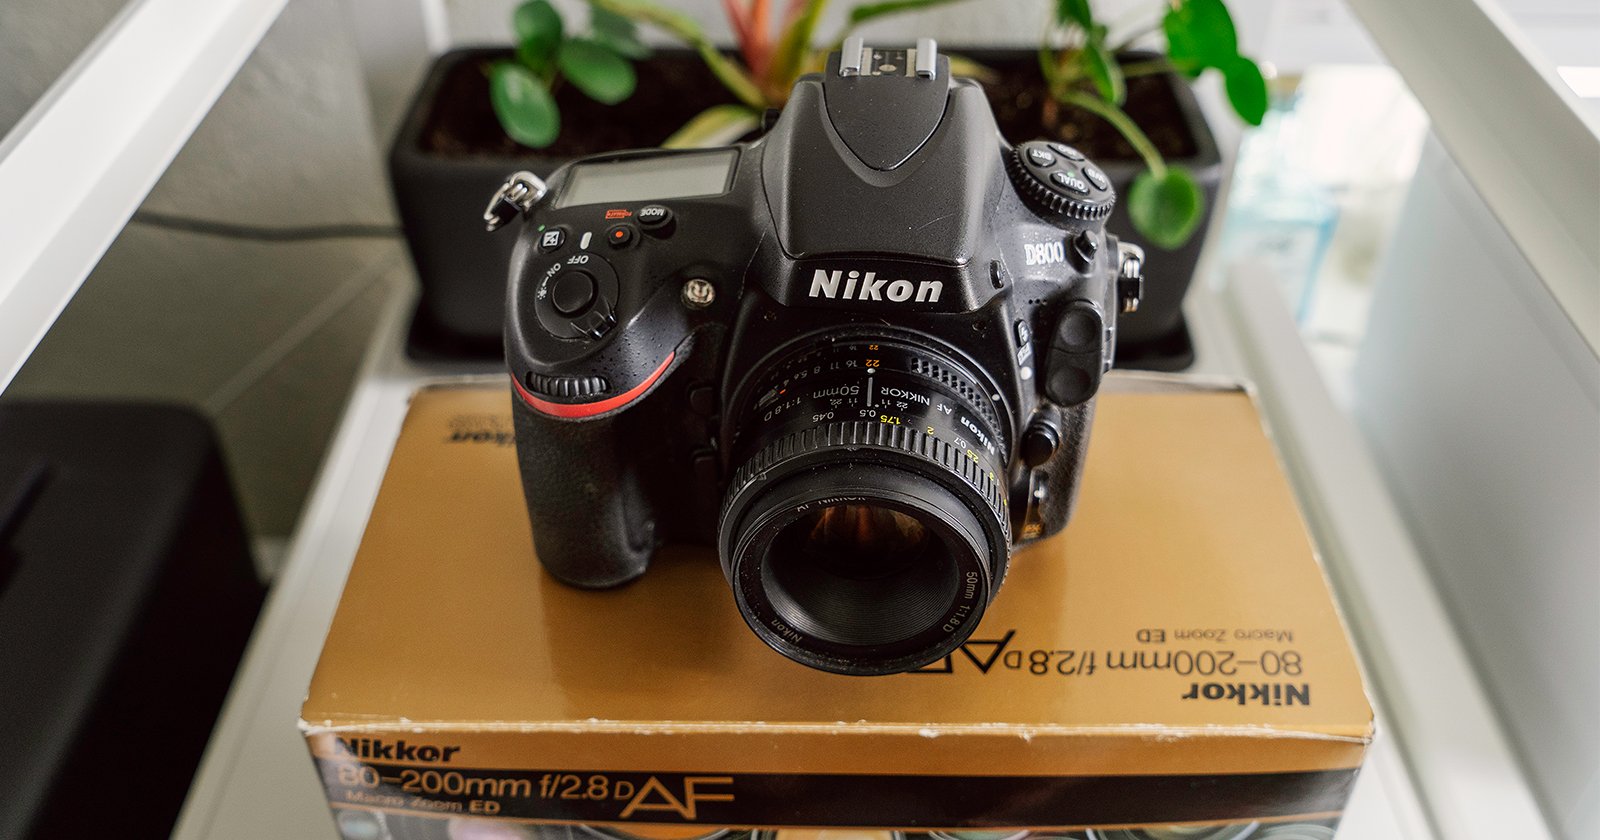 Why You Should Sell Your Gear to a Reseller